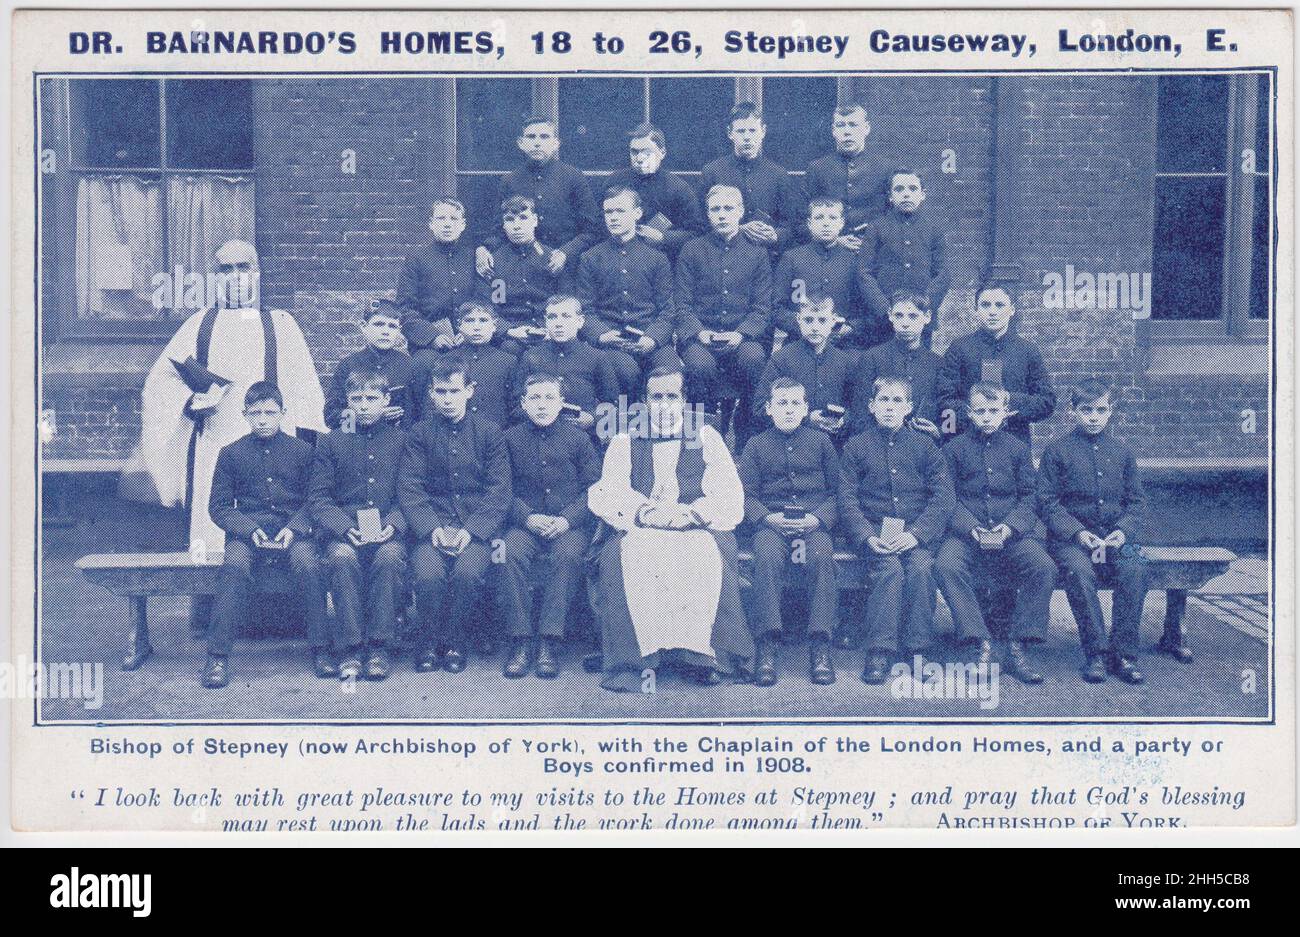 Dr Barnardo's Homes, 18-26 Stepney Causeway, London, E.: group of boys photographed with William Cosmo Gordon Lang, then Bishop of Stepney, and the Chaplain of the London Homes in 1908 Stock Photo